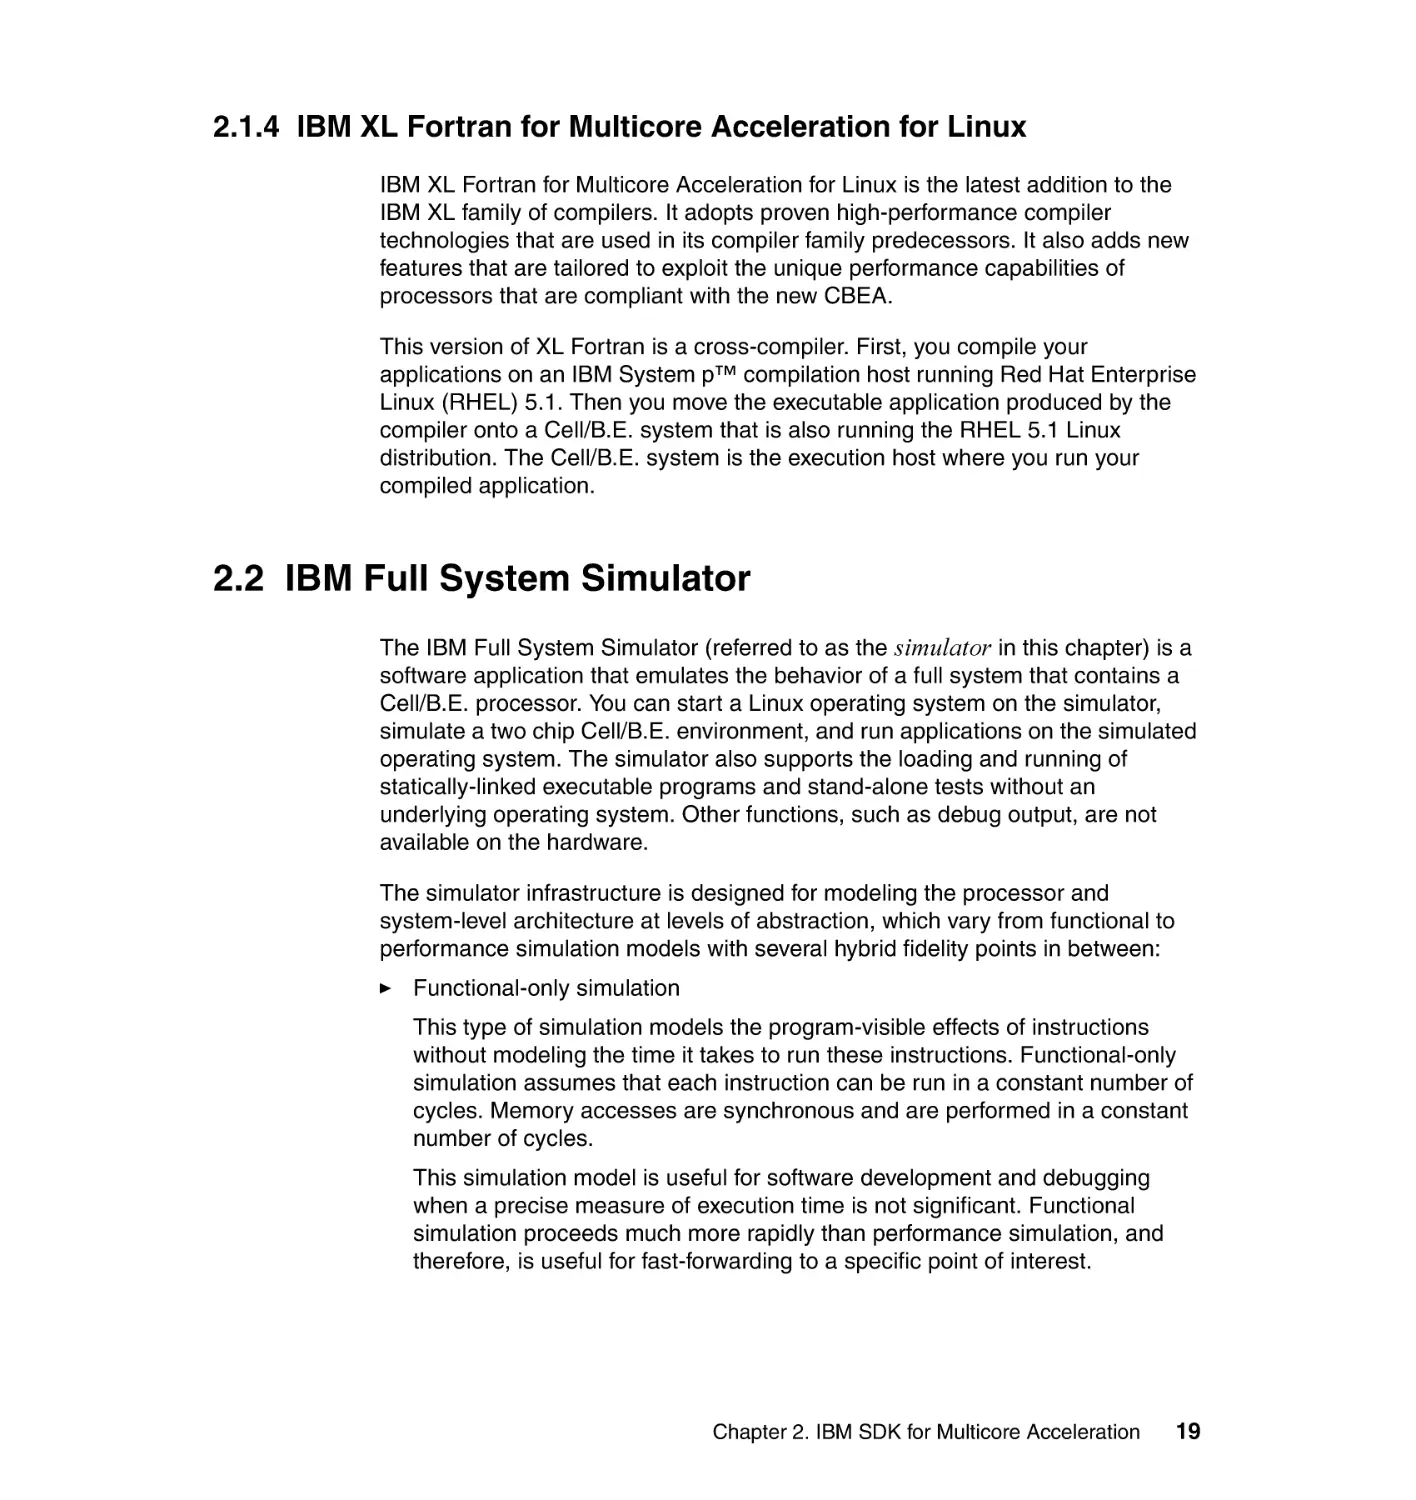 2.1.4 IBM XL Fortran for Multicore Acceleration for Linux
2.2 IBM Full System Simulator